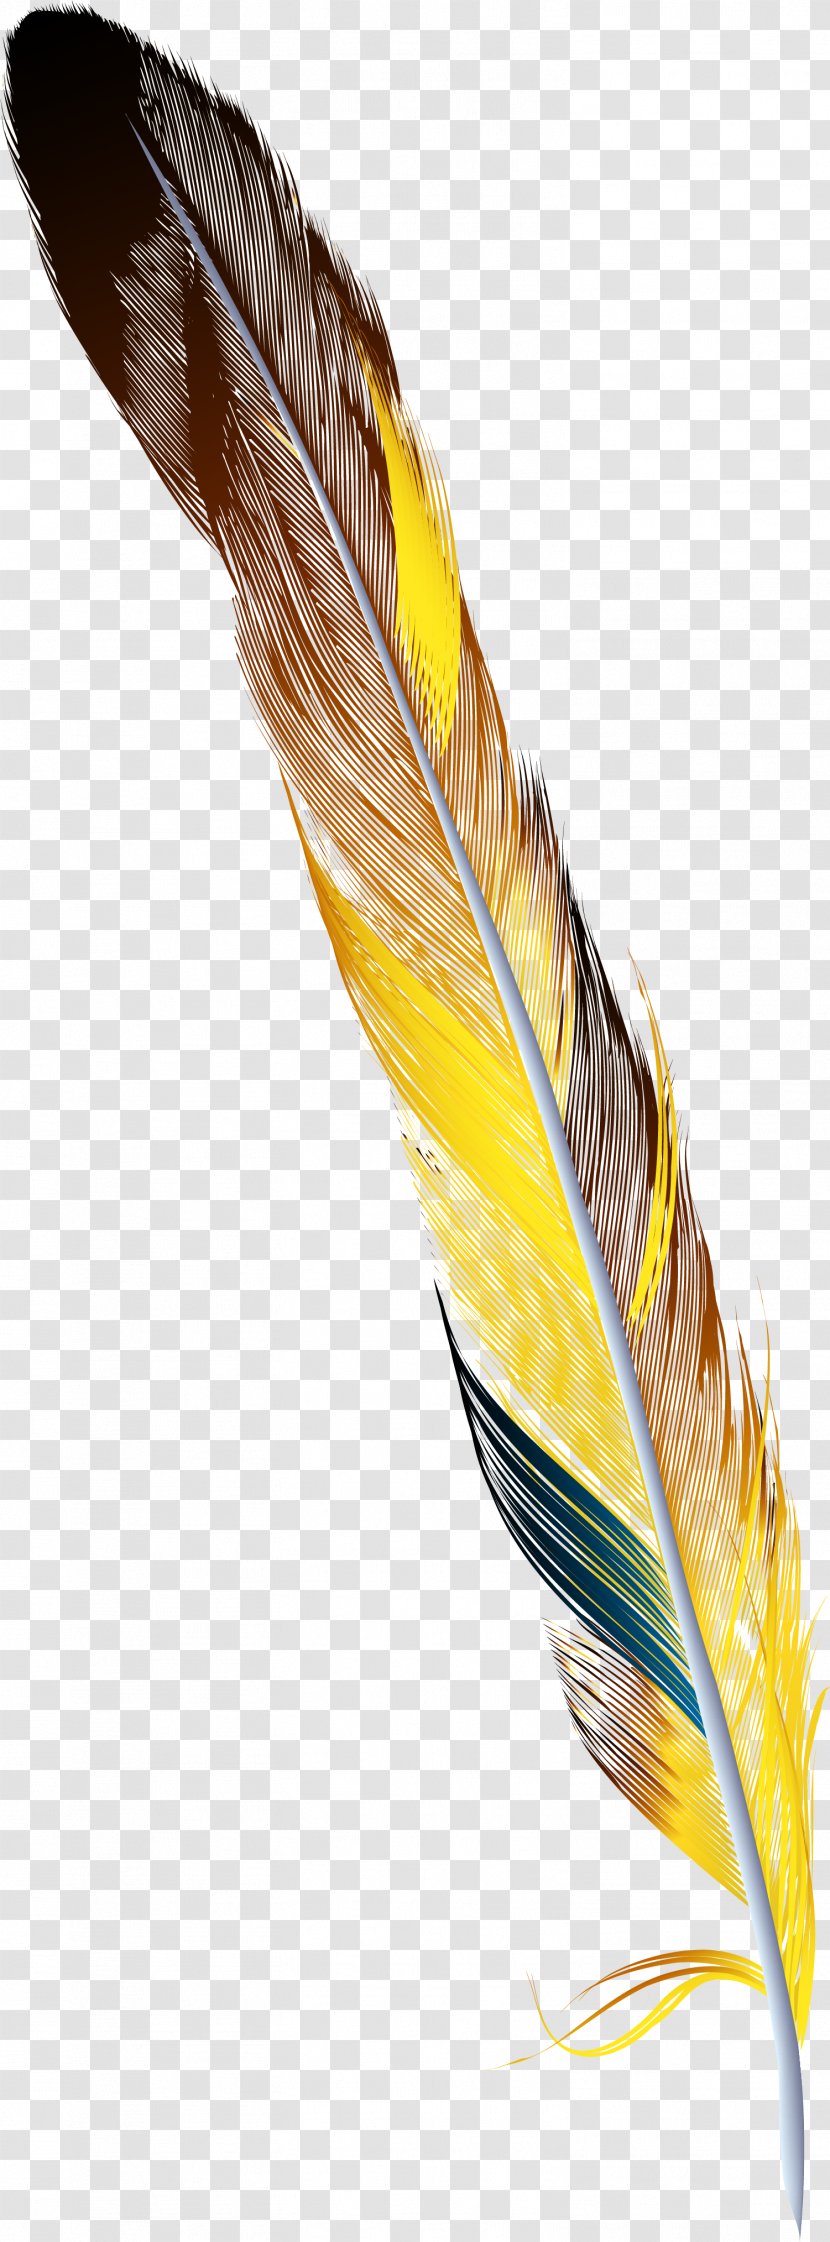 Feather Drawing - Watercolor Painting - Hand Painted Colorful Transparent PNG